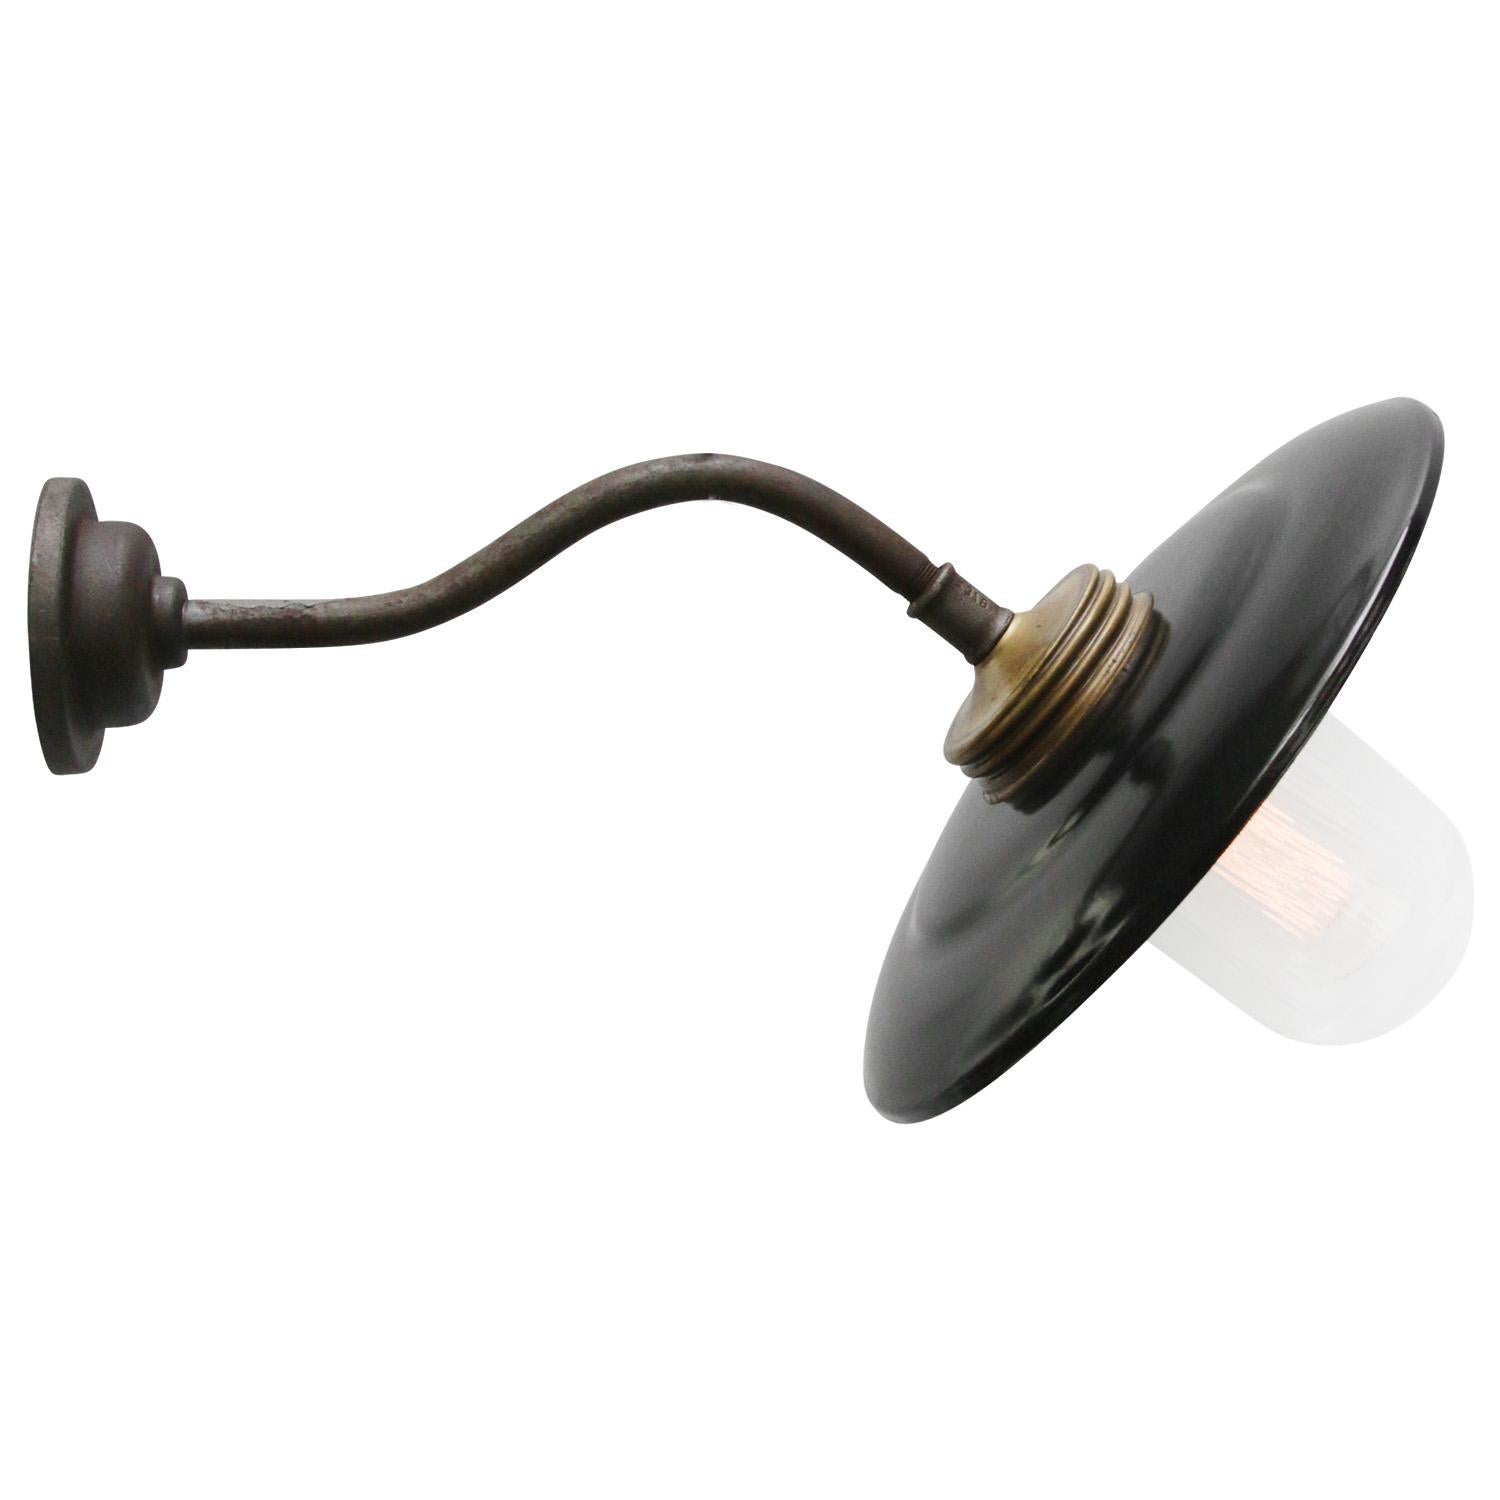 Black enamel industrial wall light with white interior.
Cast iron with brass top, clear striped glass. 

Diameter cast iron wall mount: 10.5 cm / 4”.
2 holes to secure.

Weight: 2.60 kg / 5.7 lb

Priced per individual item. All lamps have been made